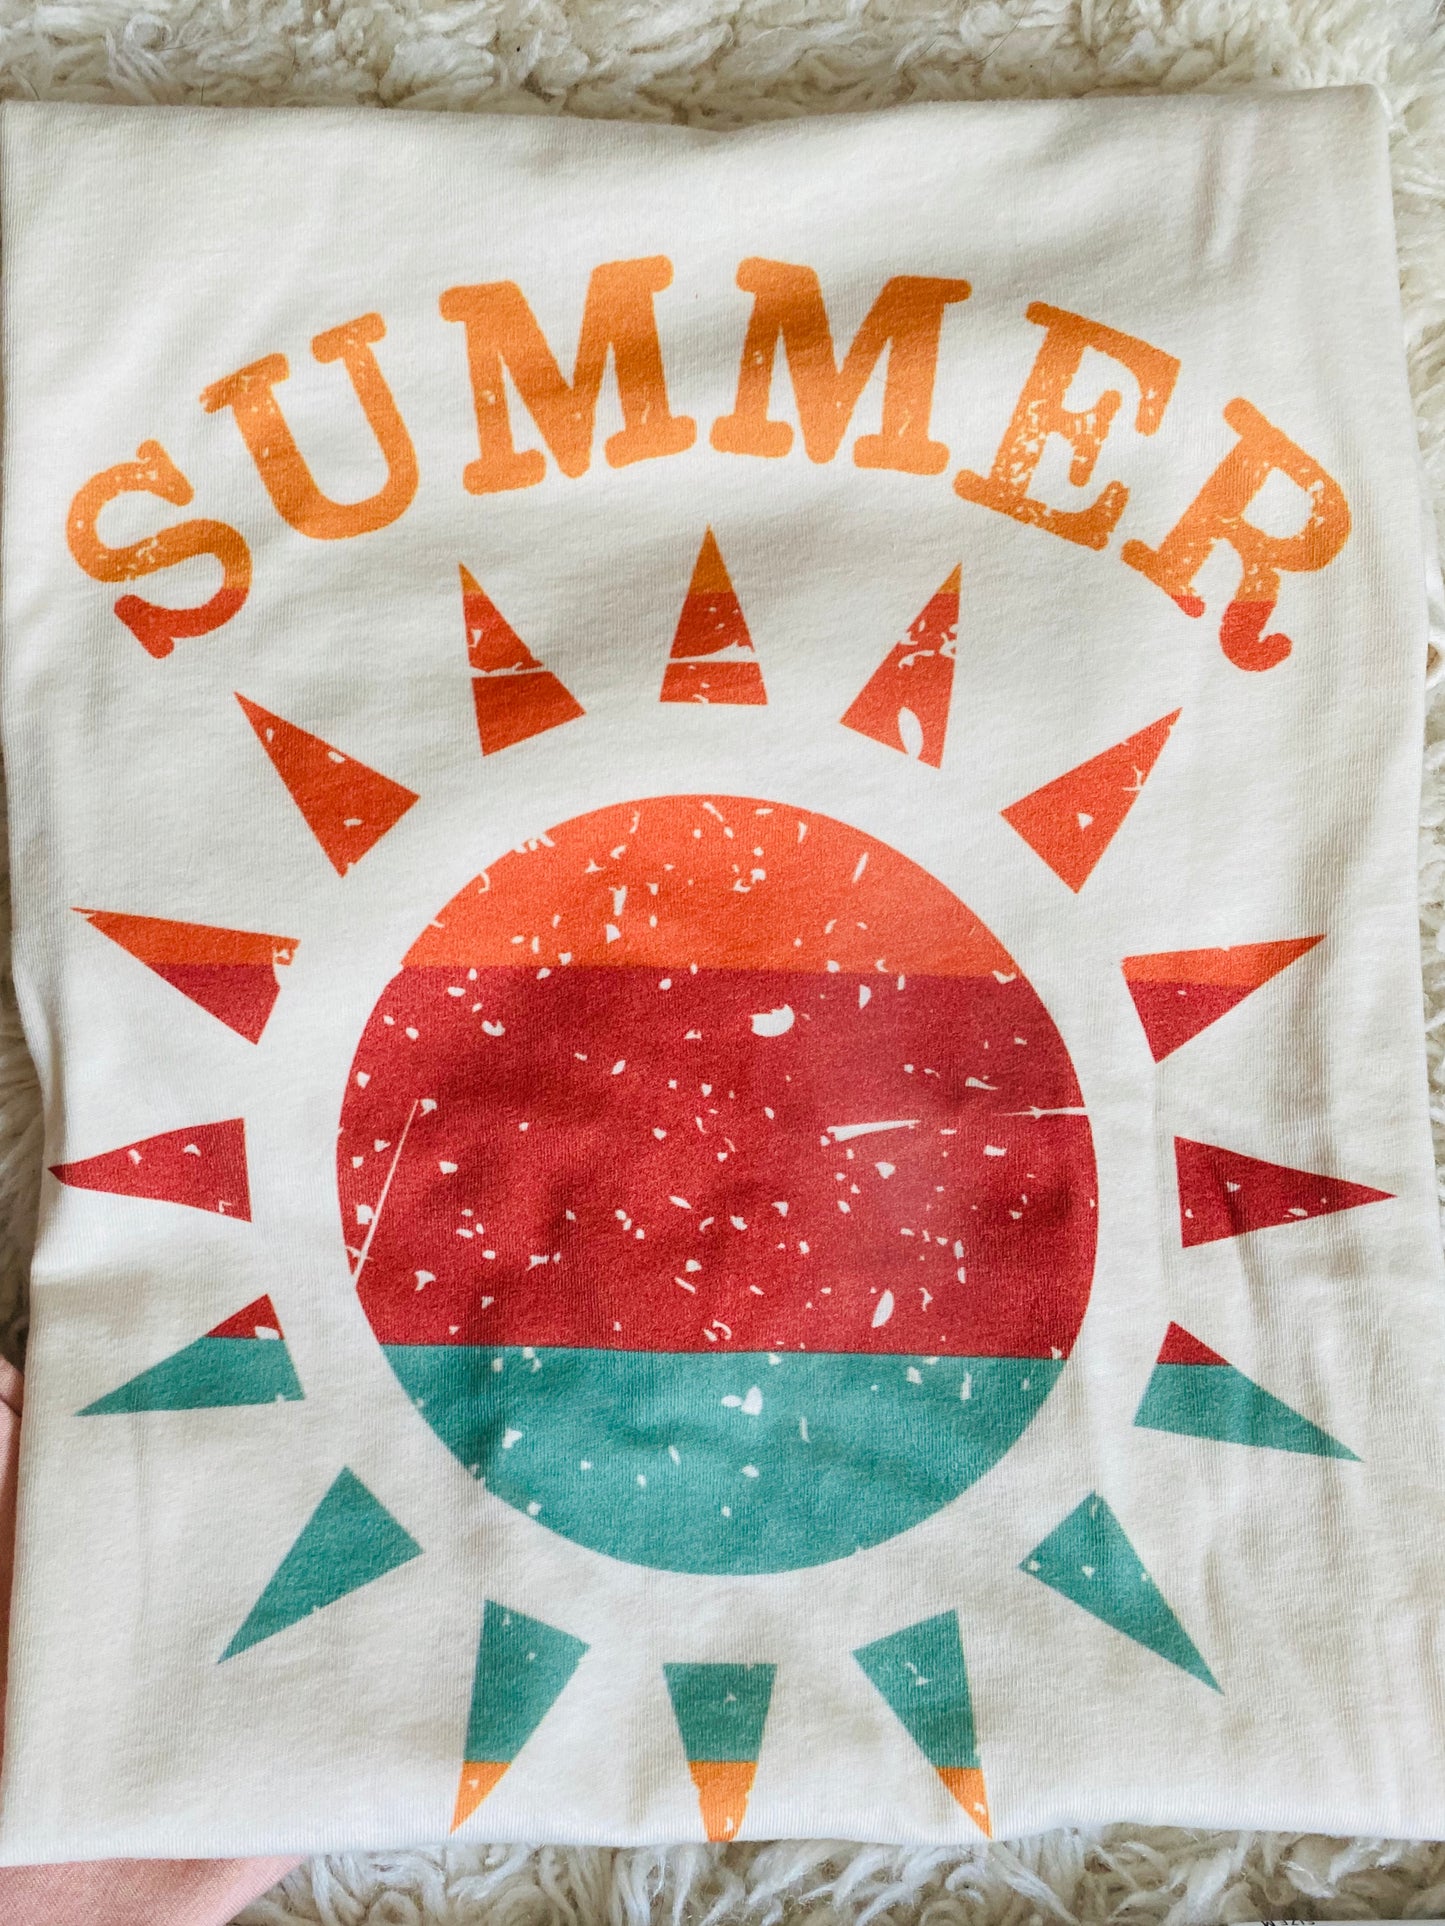 Summer Time T